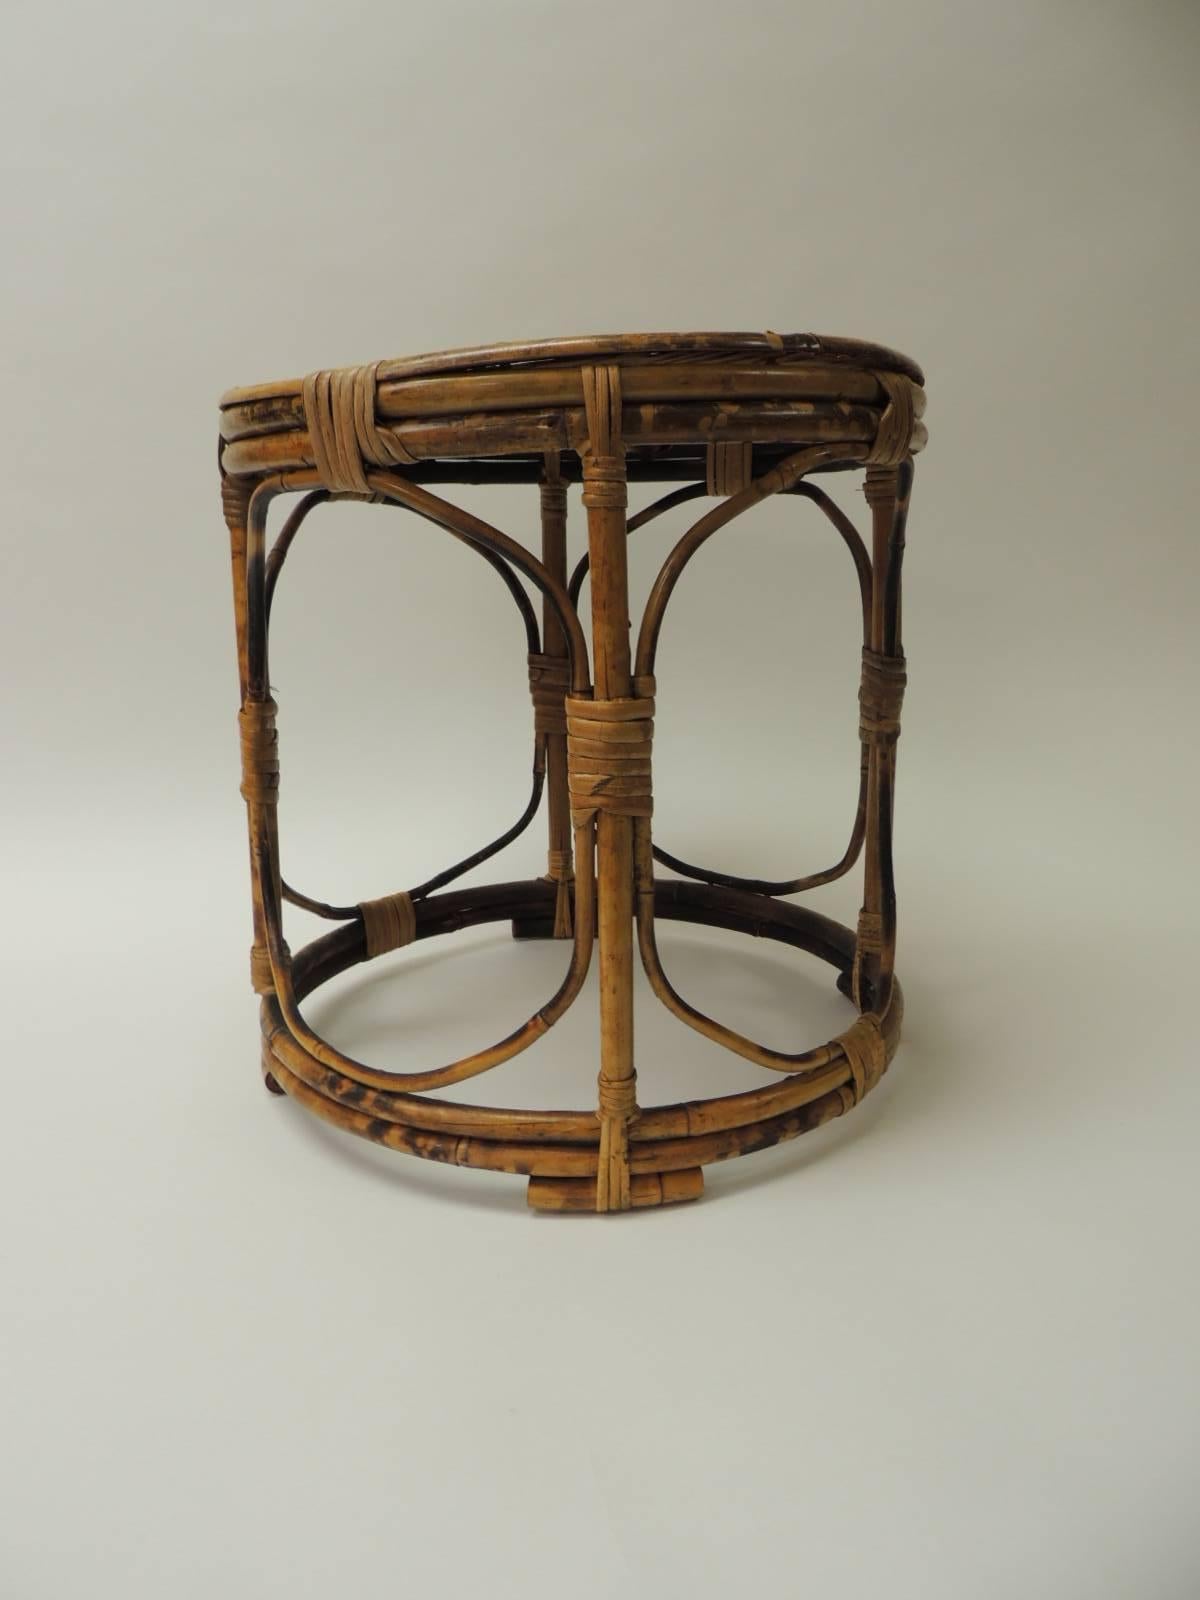 Vintage bamboo round side table
Bamboo vintage round small side table with slatted bamboo top intertwined with rattan and small bamboo feet. Circular bamboo base. Bamboo was burnt to resemble aging. Artisanal style.  Embellished with a faux tortoise